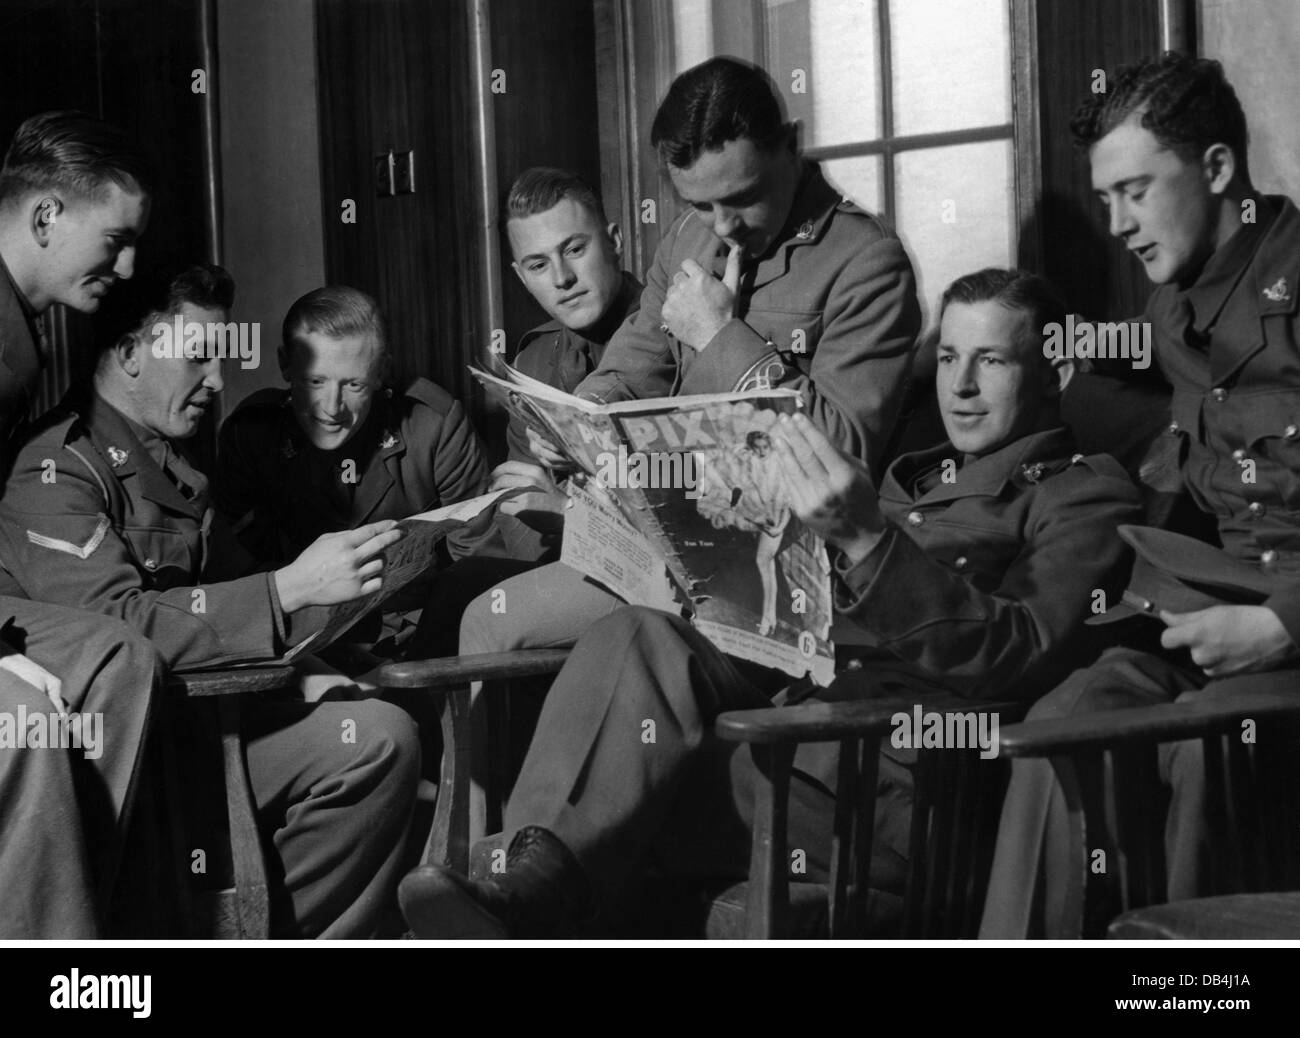 military, Australia, Royal Military College, Duntroon, circa 1940, Additional-Rights-Clearences-Not Available Stock Photo